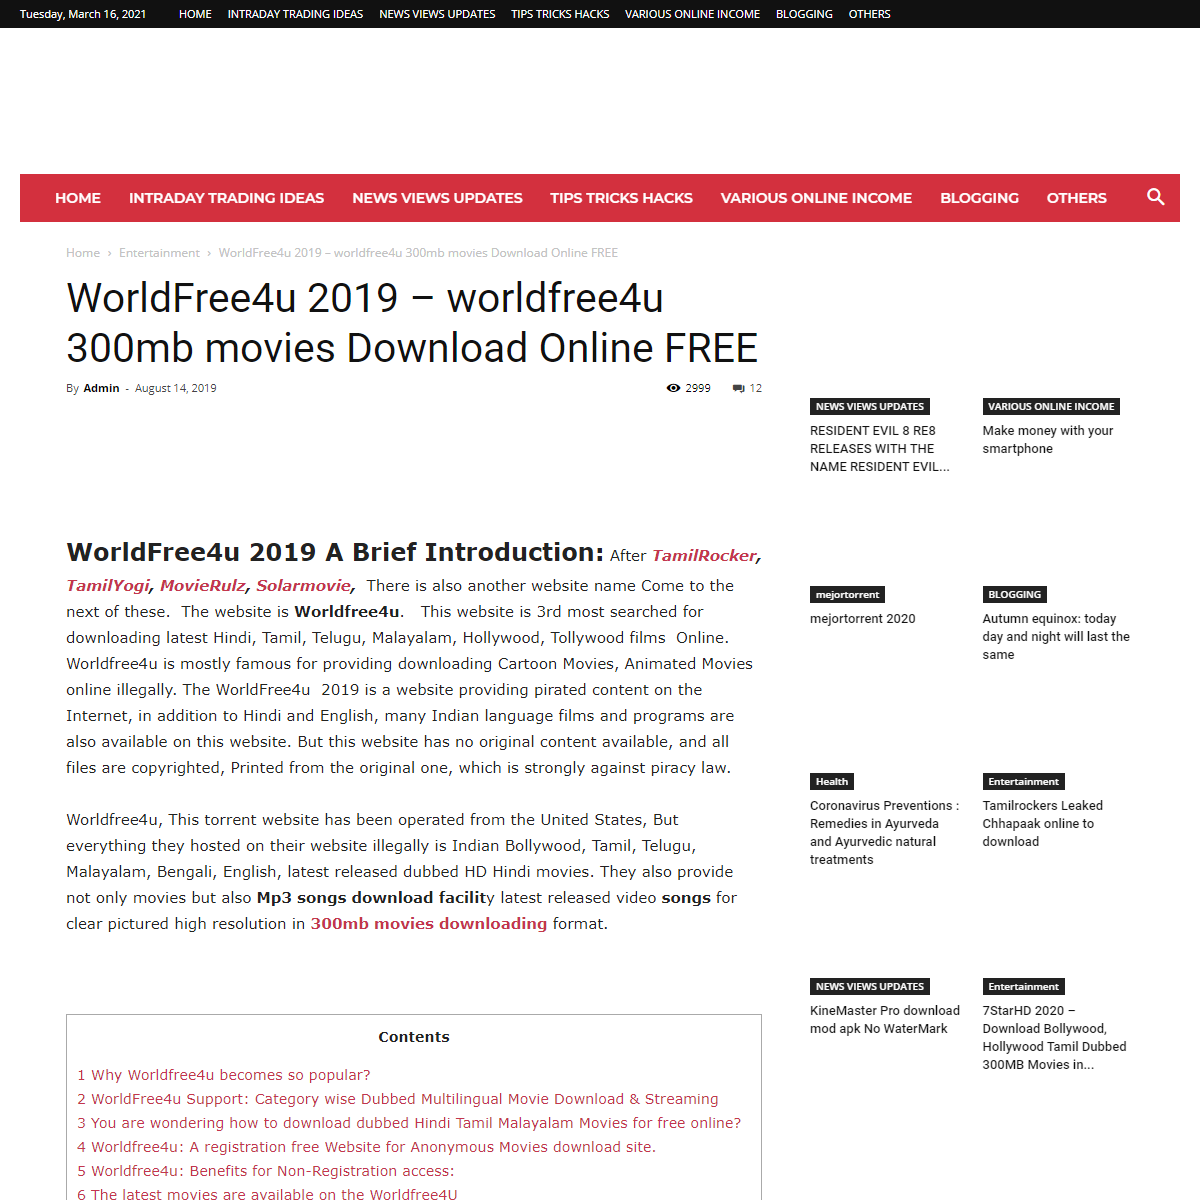 A complete backup of https://www.learn4funs.com/entertainment/worldfree4u-300mb-movies-downloads/